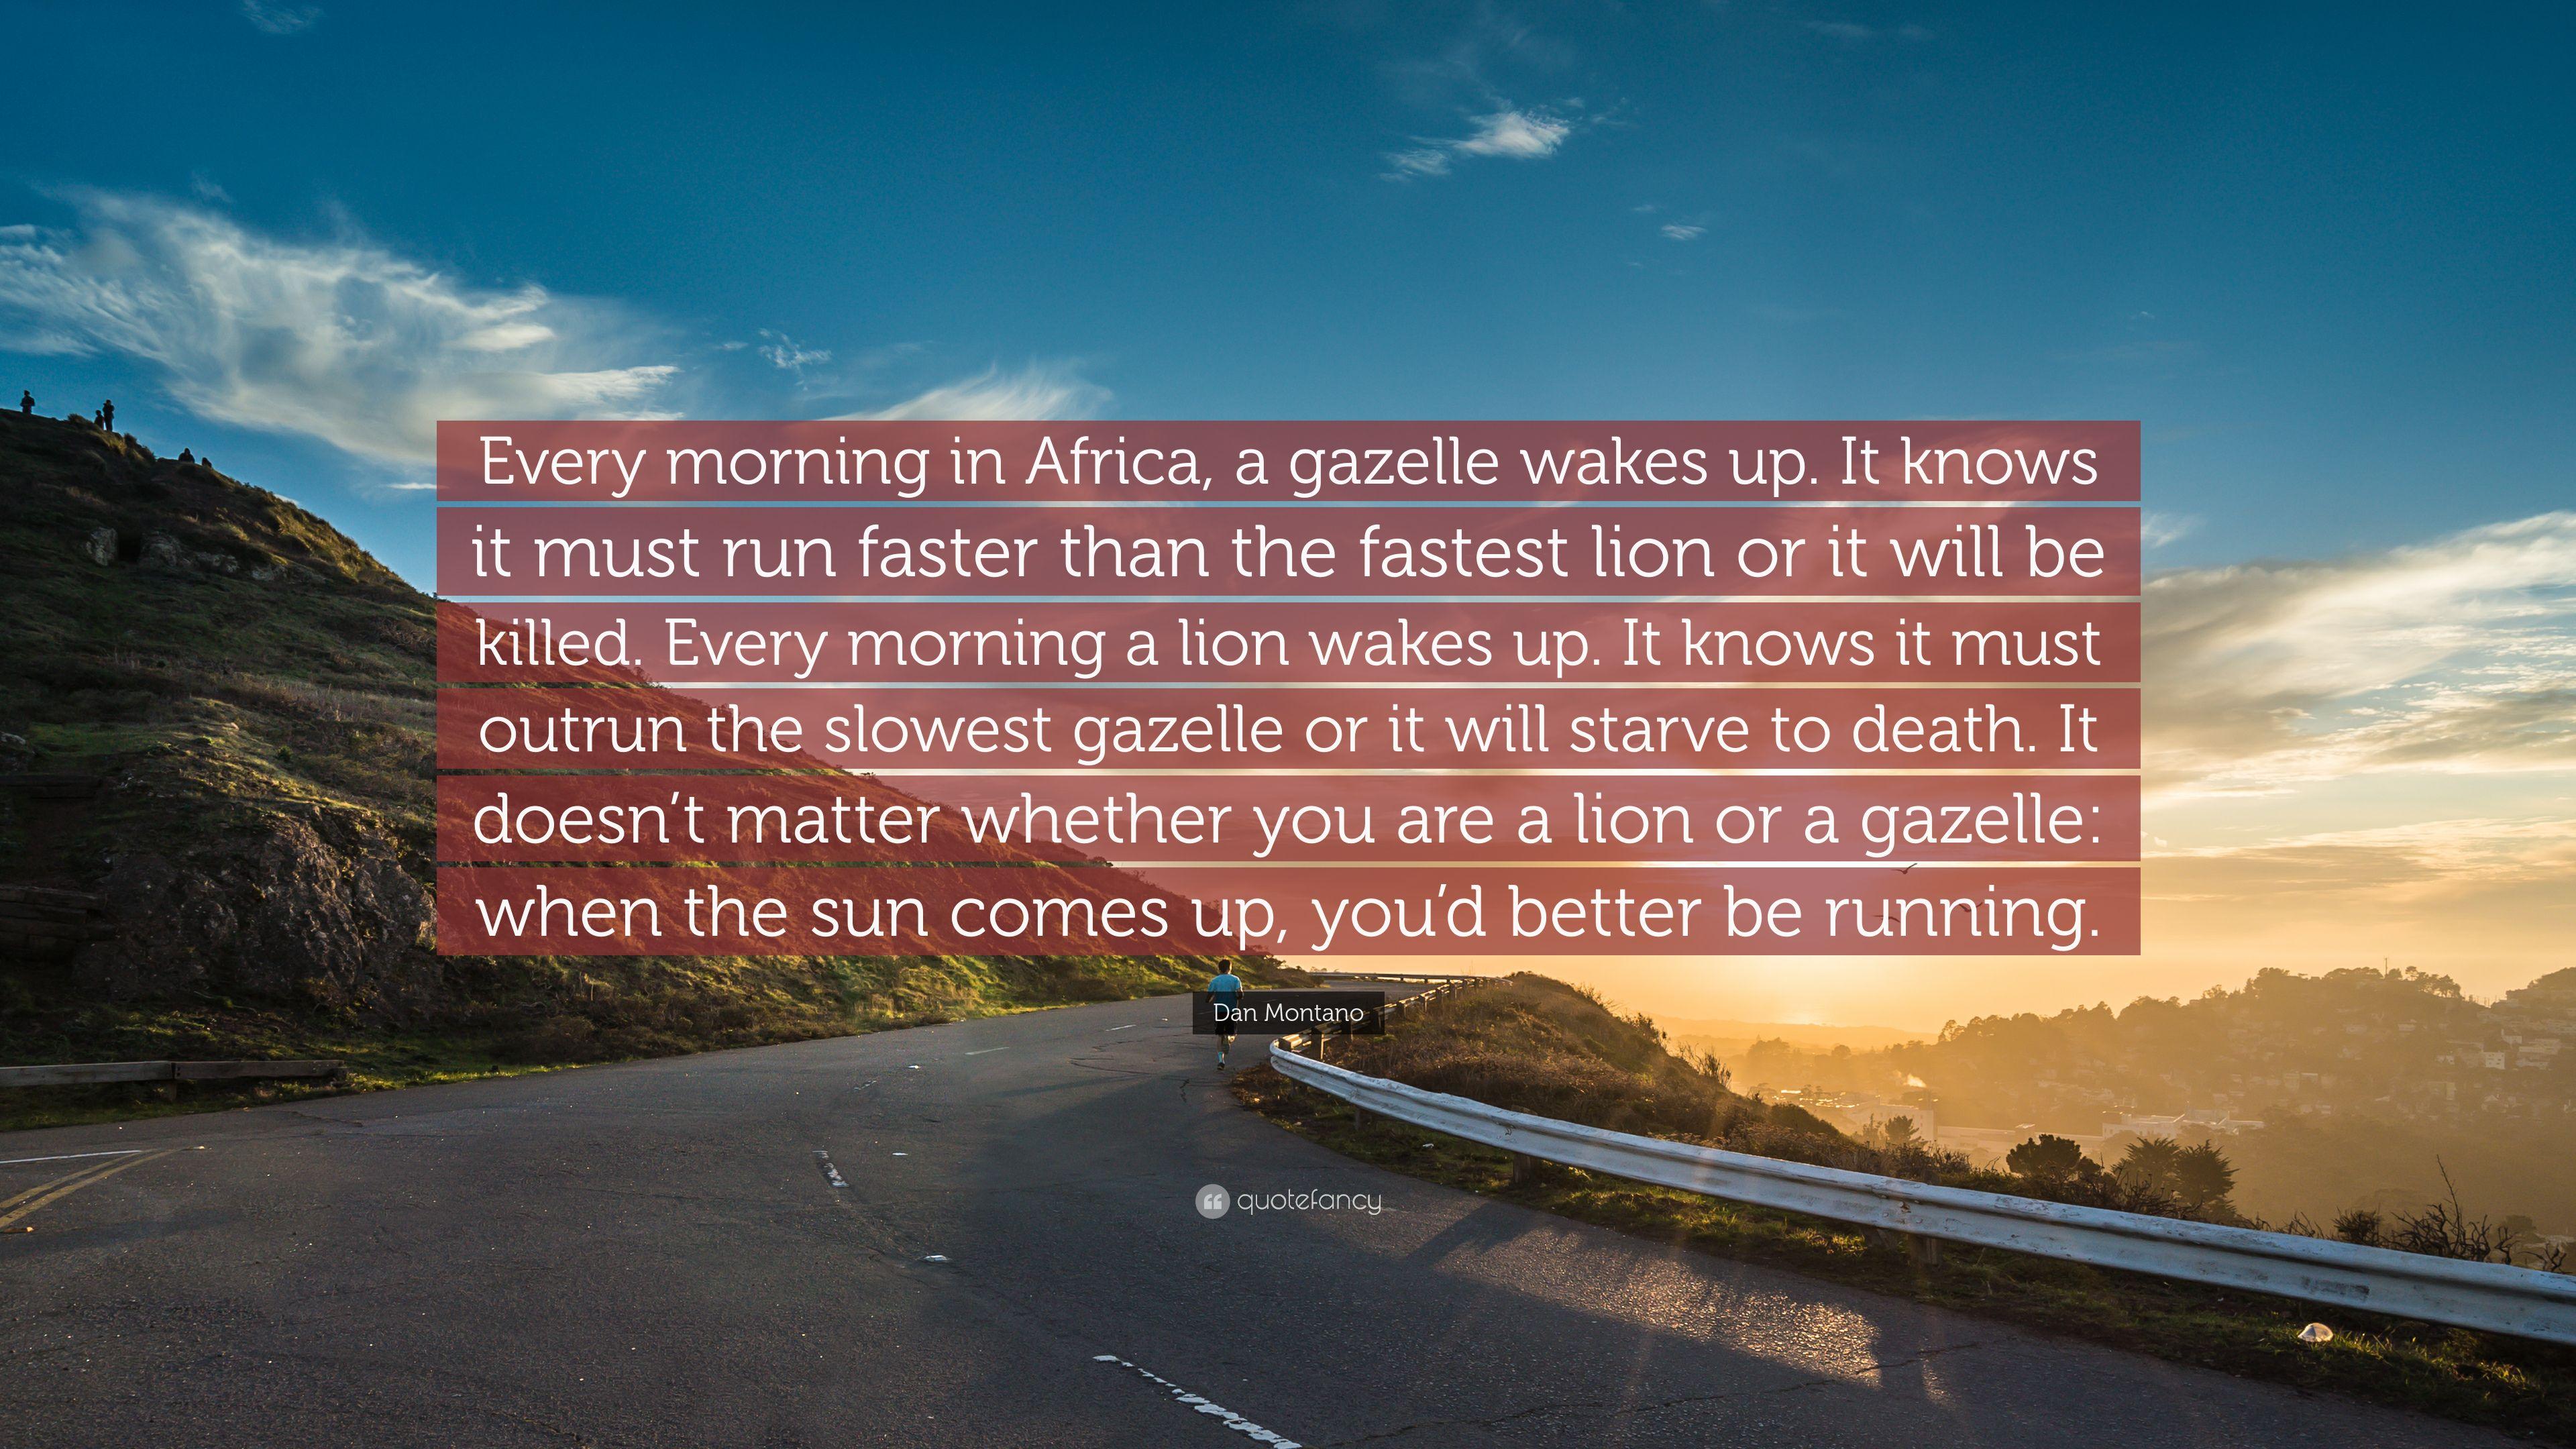 Dan Montano Quote: “Every morning in Africa, a gazelle wakes up